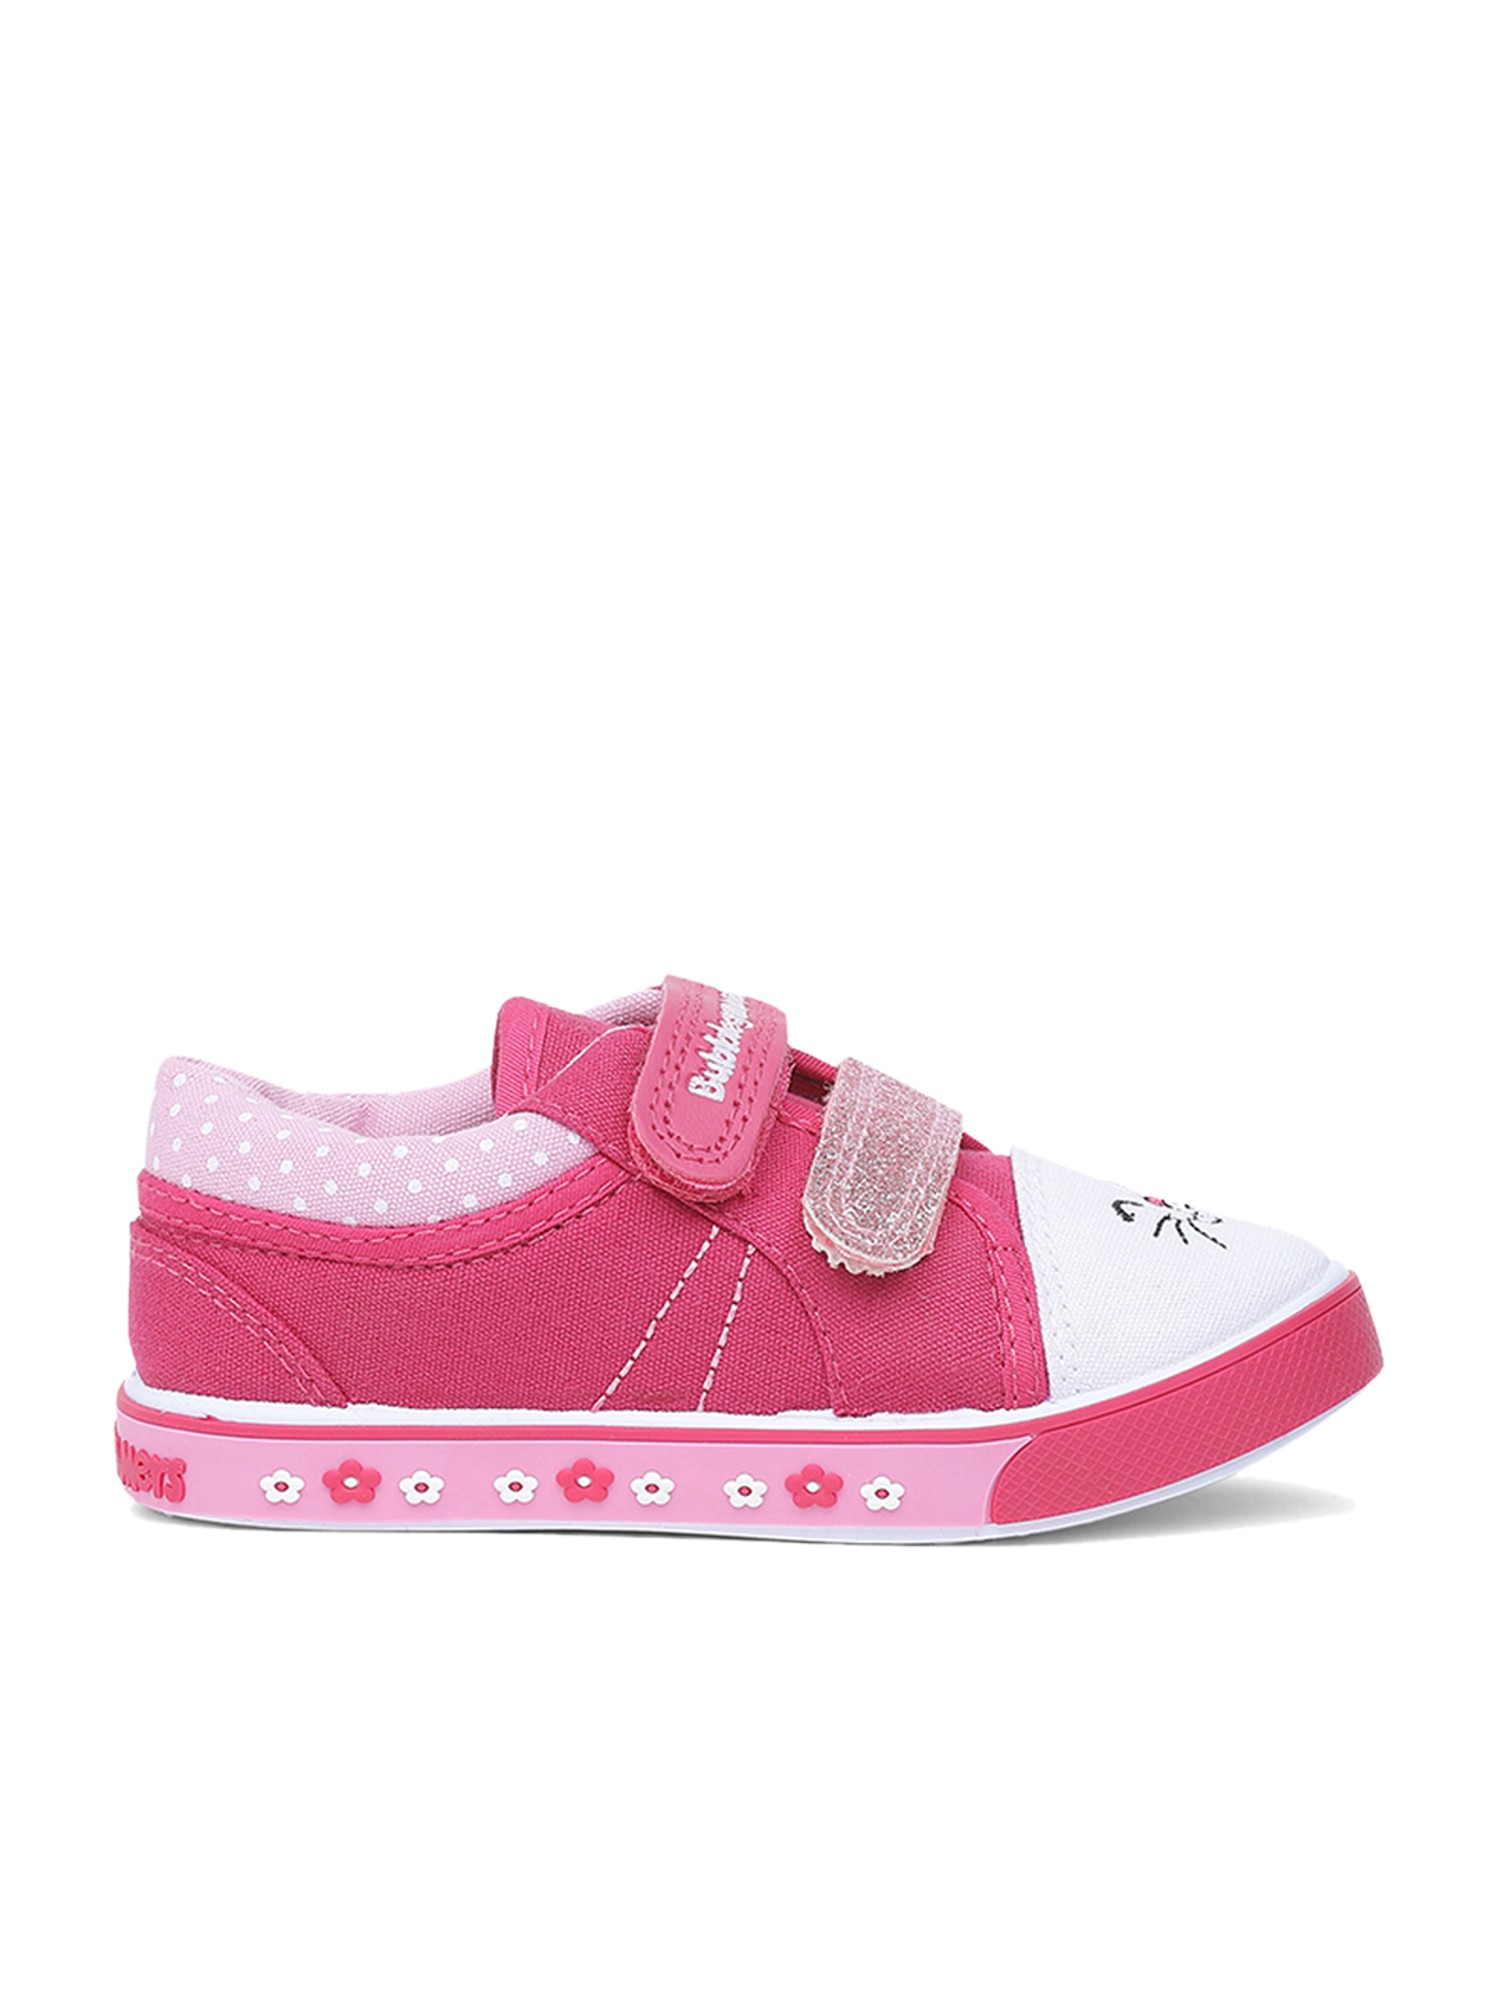 Girls - Pink - XPLR - Athletic & Sneakers (Age 0-16) | adidas US